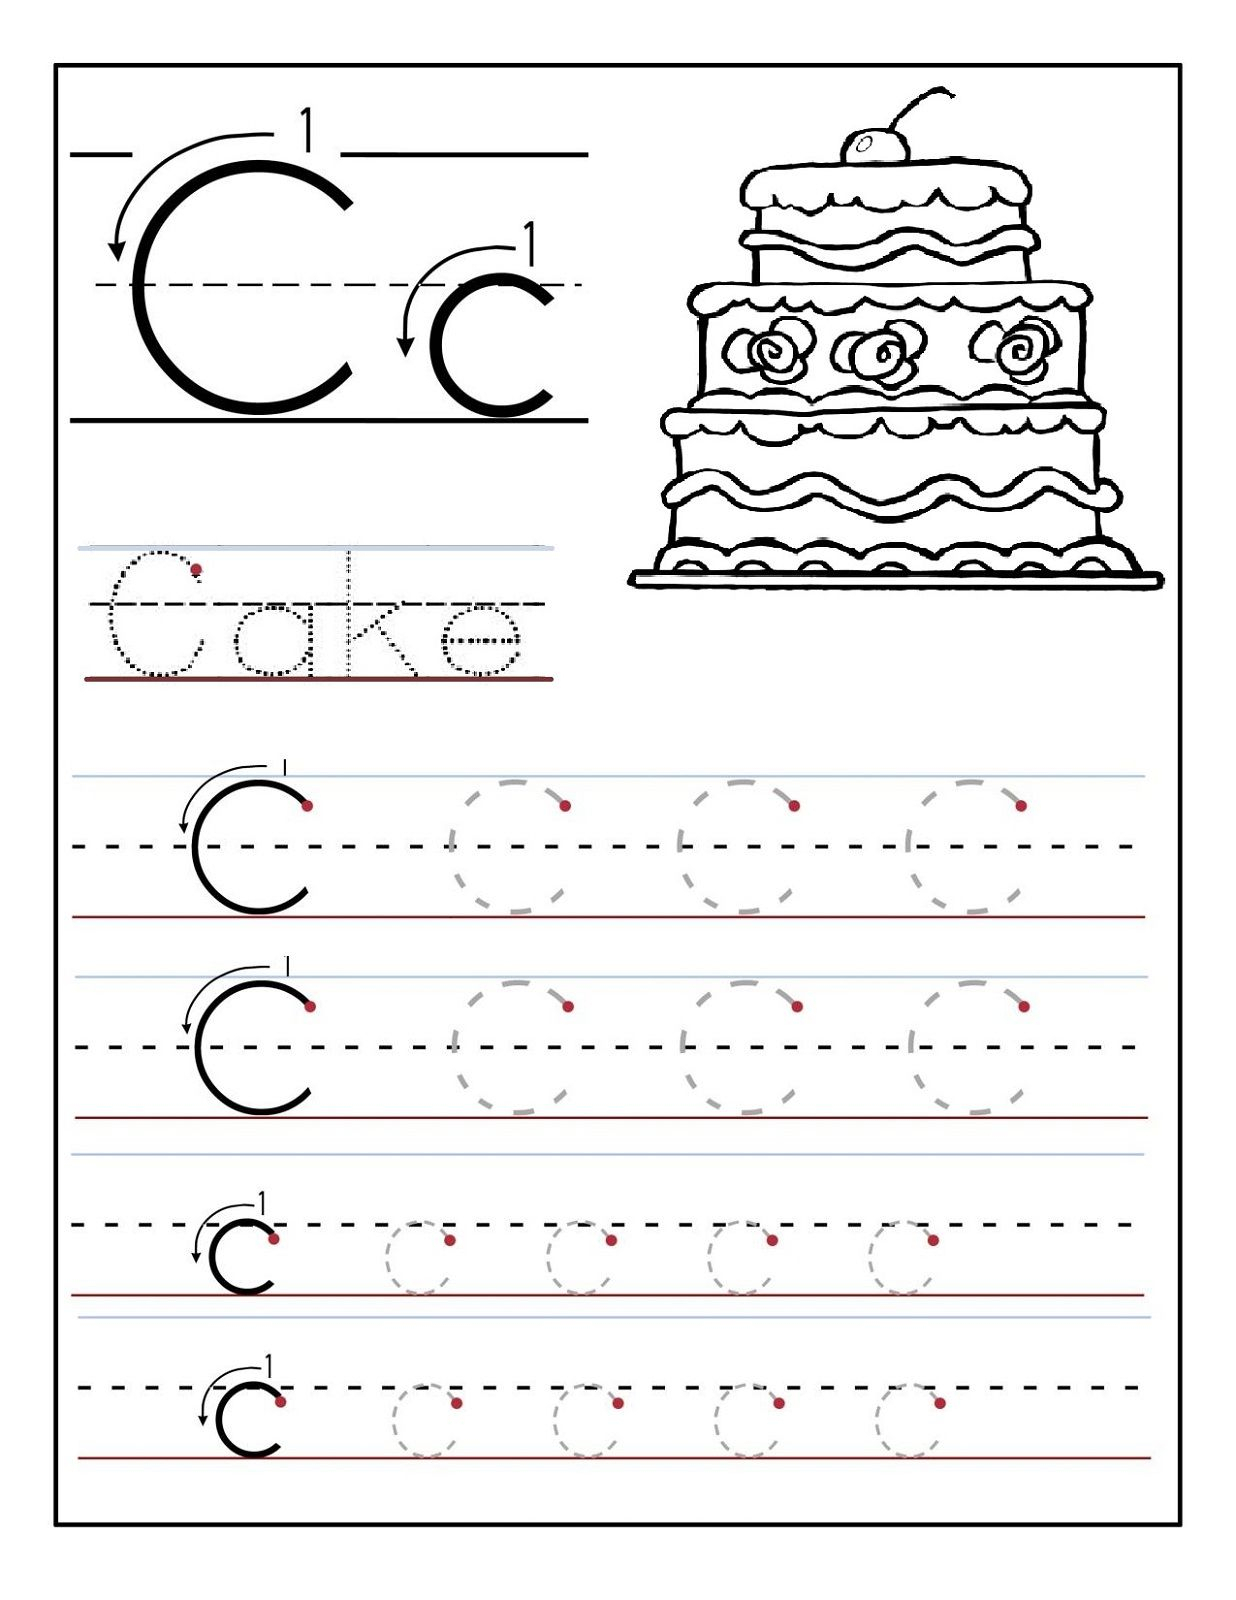 Trace The Letter C Worksheets | Tracing Worksheets Preschool for C Letter Tracing Worksheet